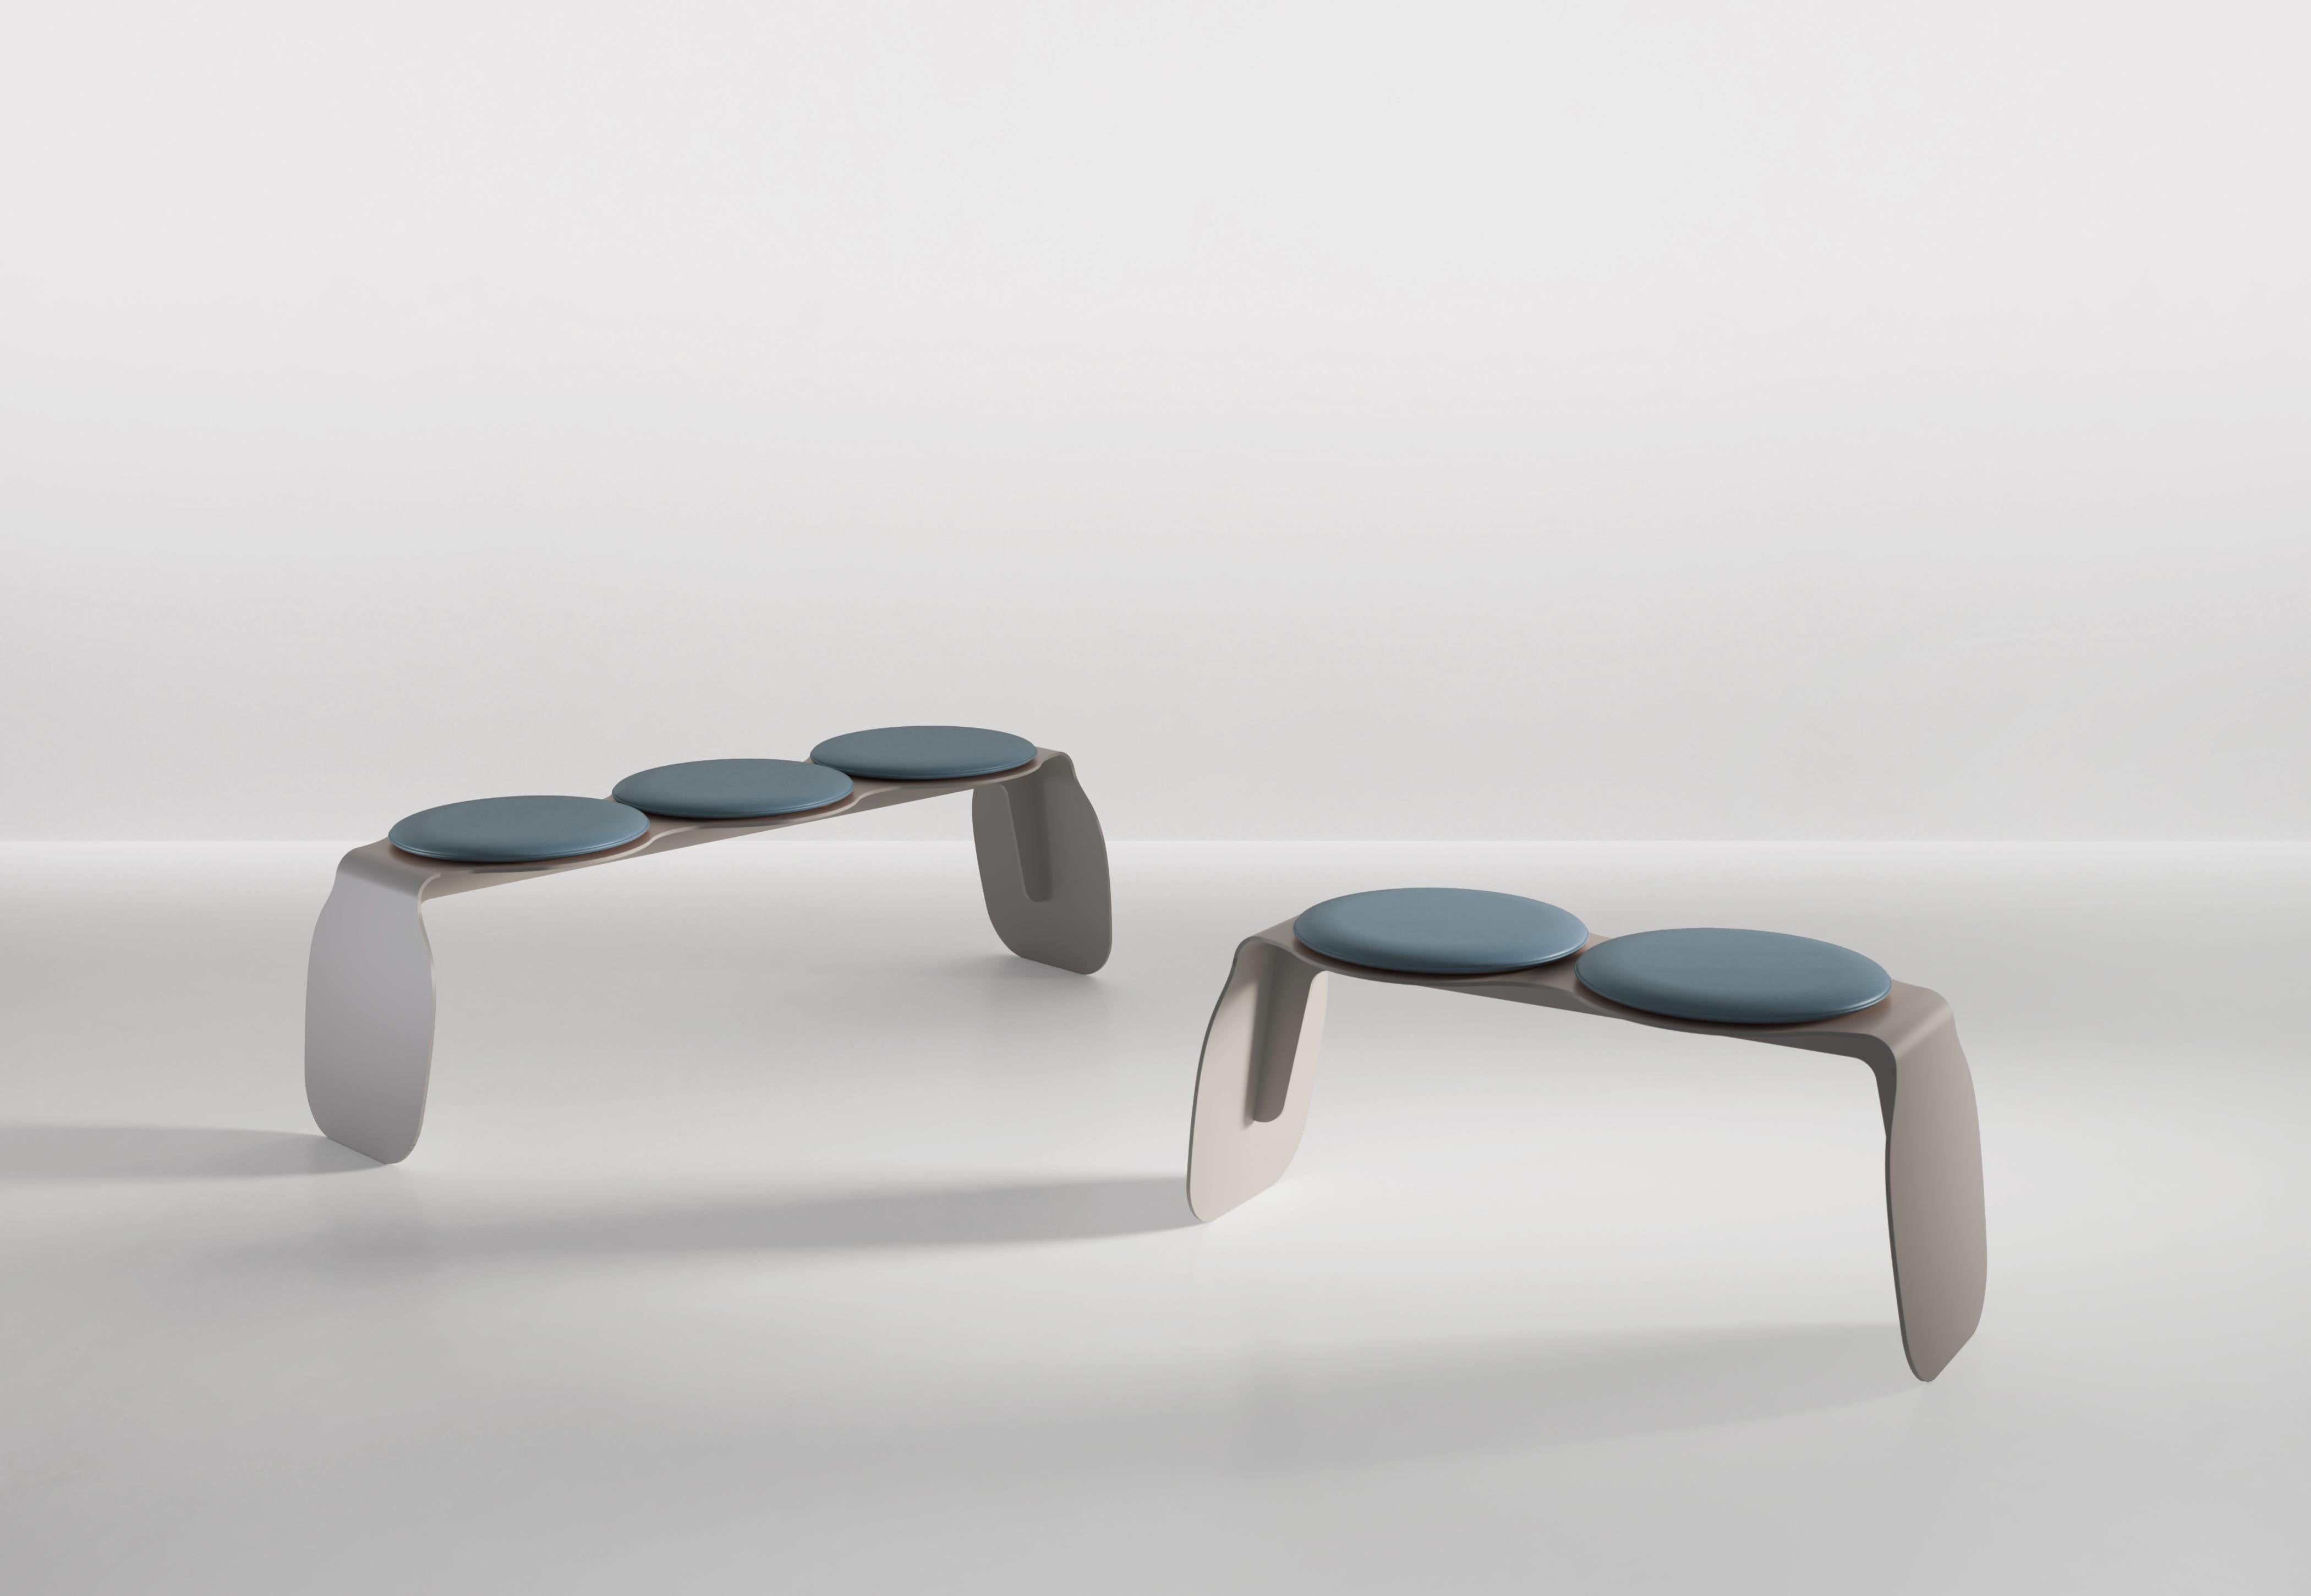 The Apollo series is comprised of benches and stools available in 1, 2 or 3-seat options. The seat is made from a single piece of bent metal and all 3 are available with or without seat cushions. Each seat cushion contains a small magnet to secure